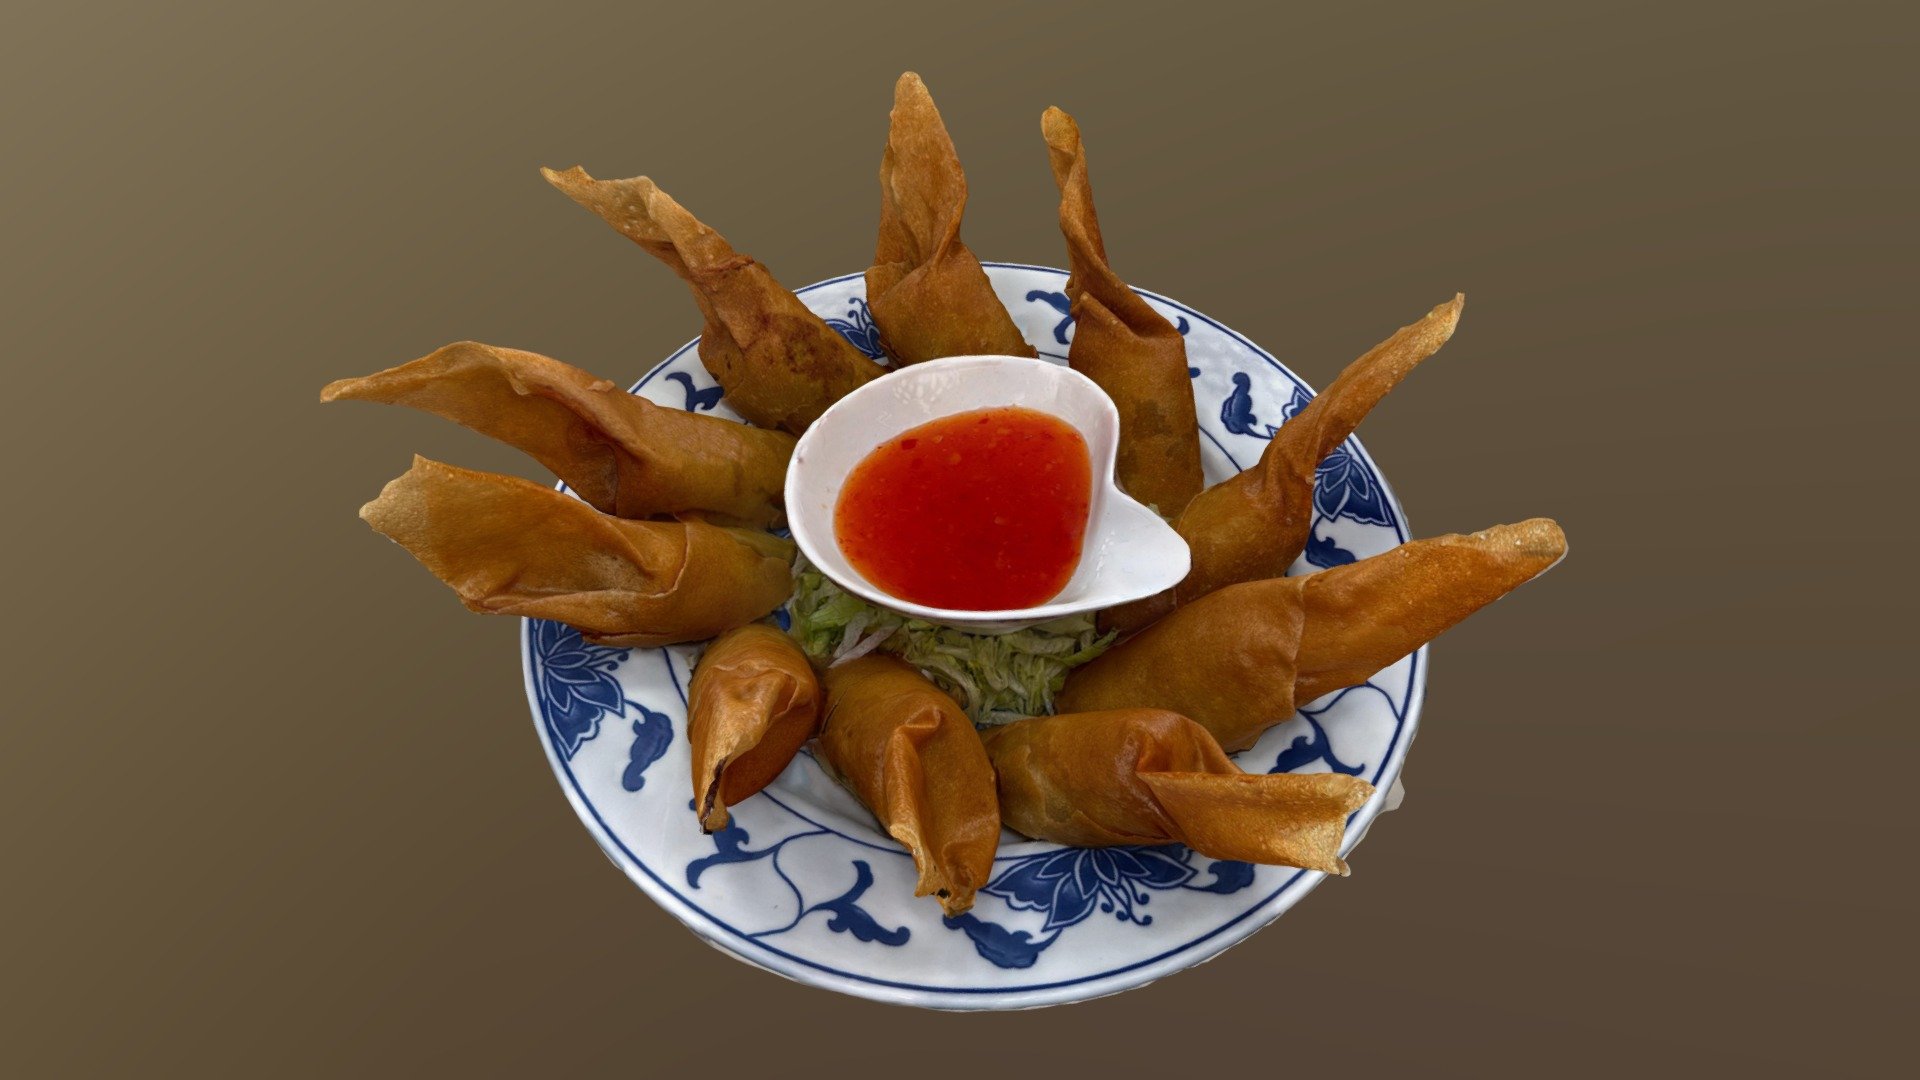 Crispy spring rolls filled with fresh vegetables

Emma’s
Boldly Redefined Asian Cuisine Driven by modern culinary technique and Northern California influence

817 Francisco Blvd W, San Rafael, CA 94901 - Emma's Vegetable Spring Rolls - 3D model by Augmented Reality Marketing Solutions LLC (@AugRealMarketing) 3d model